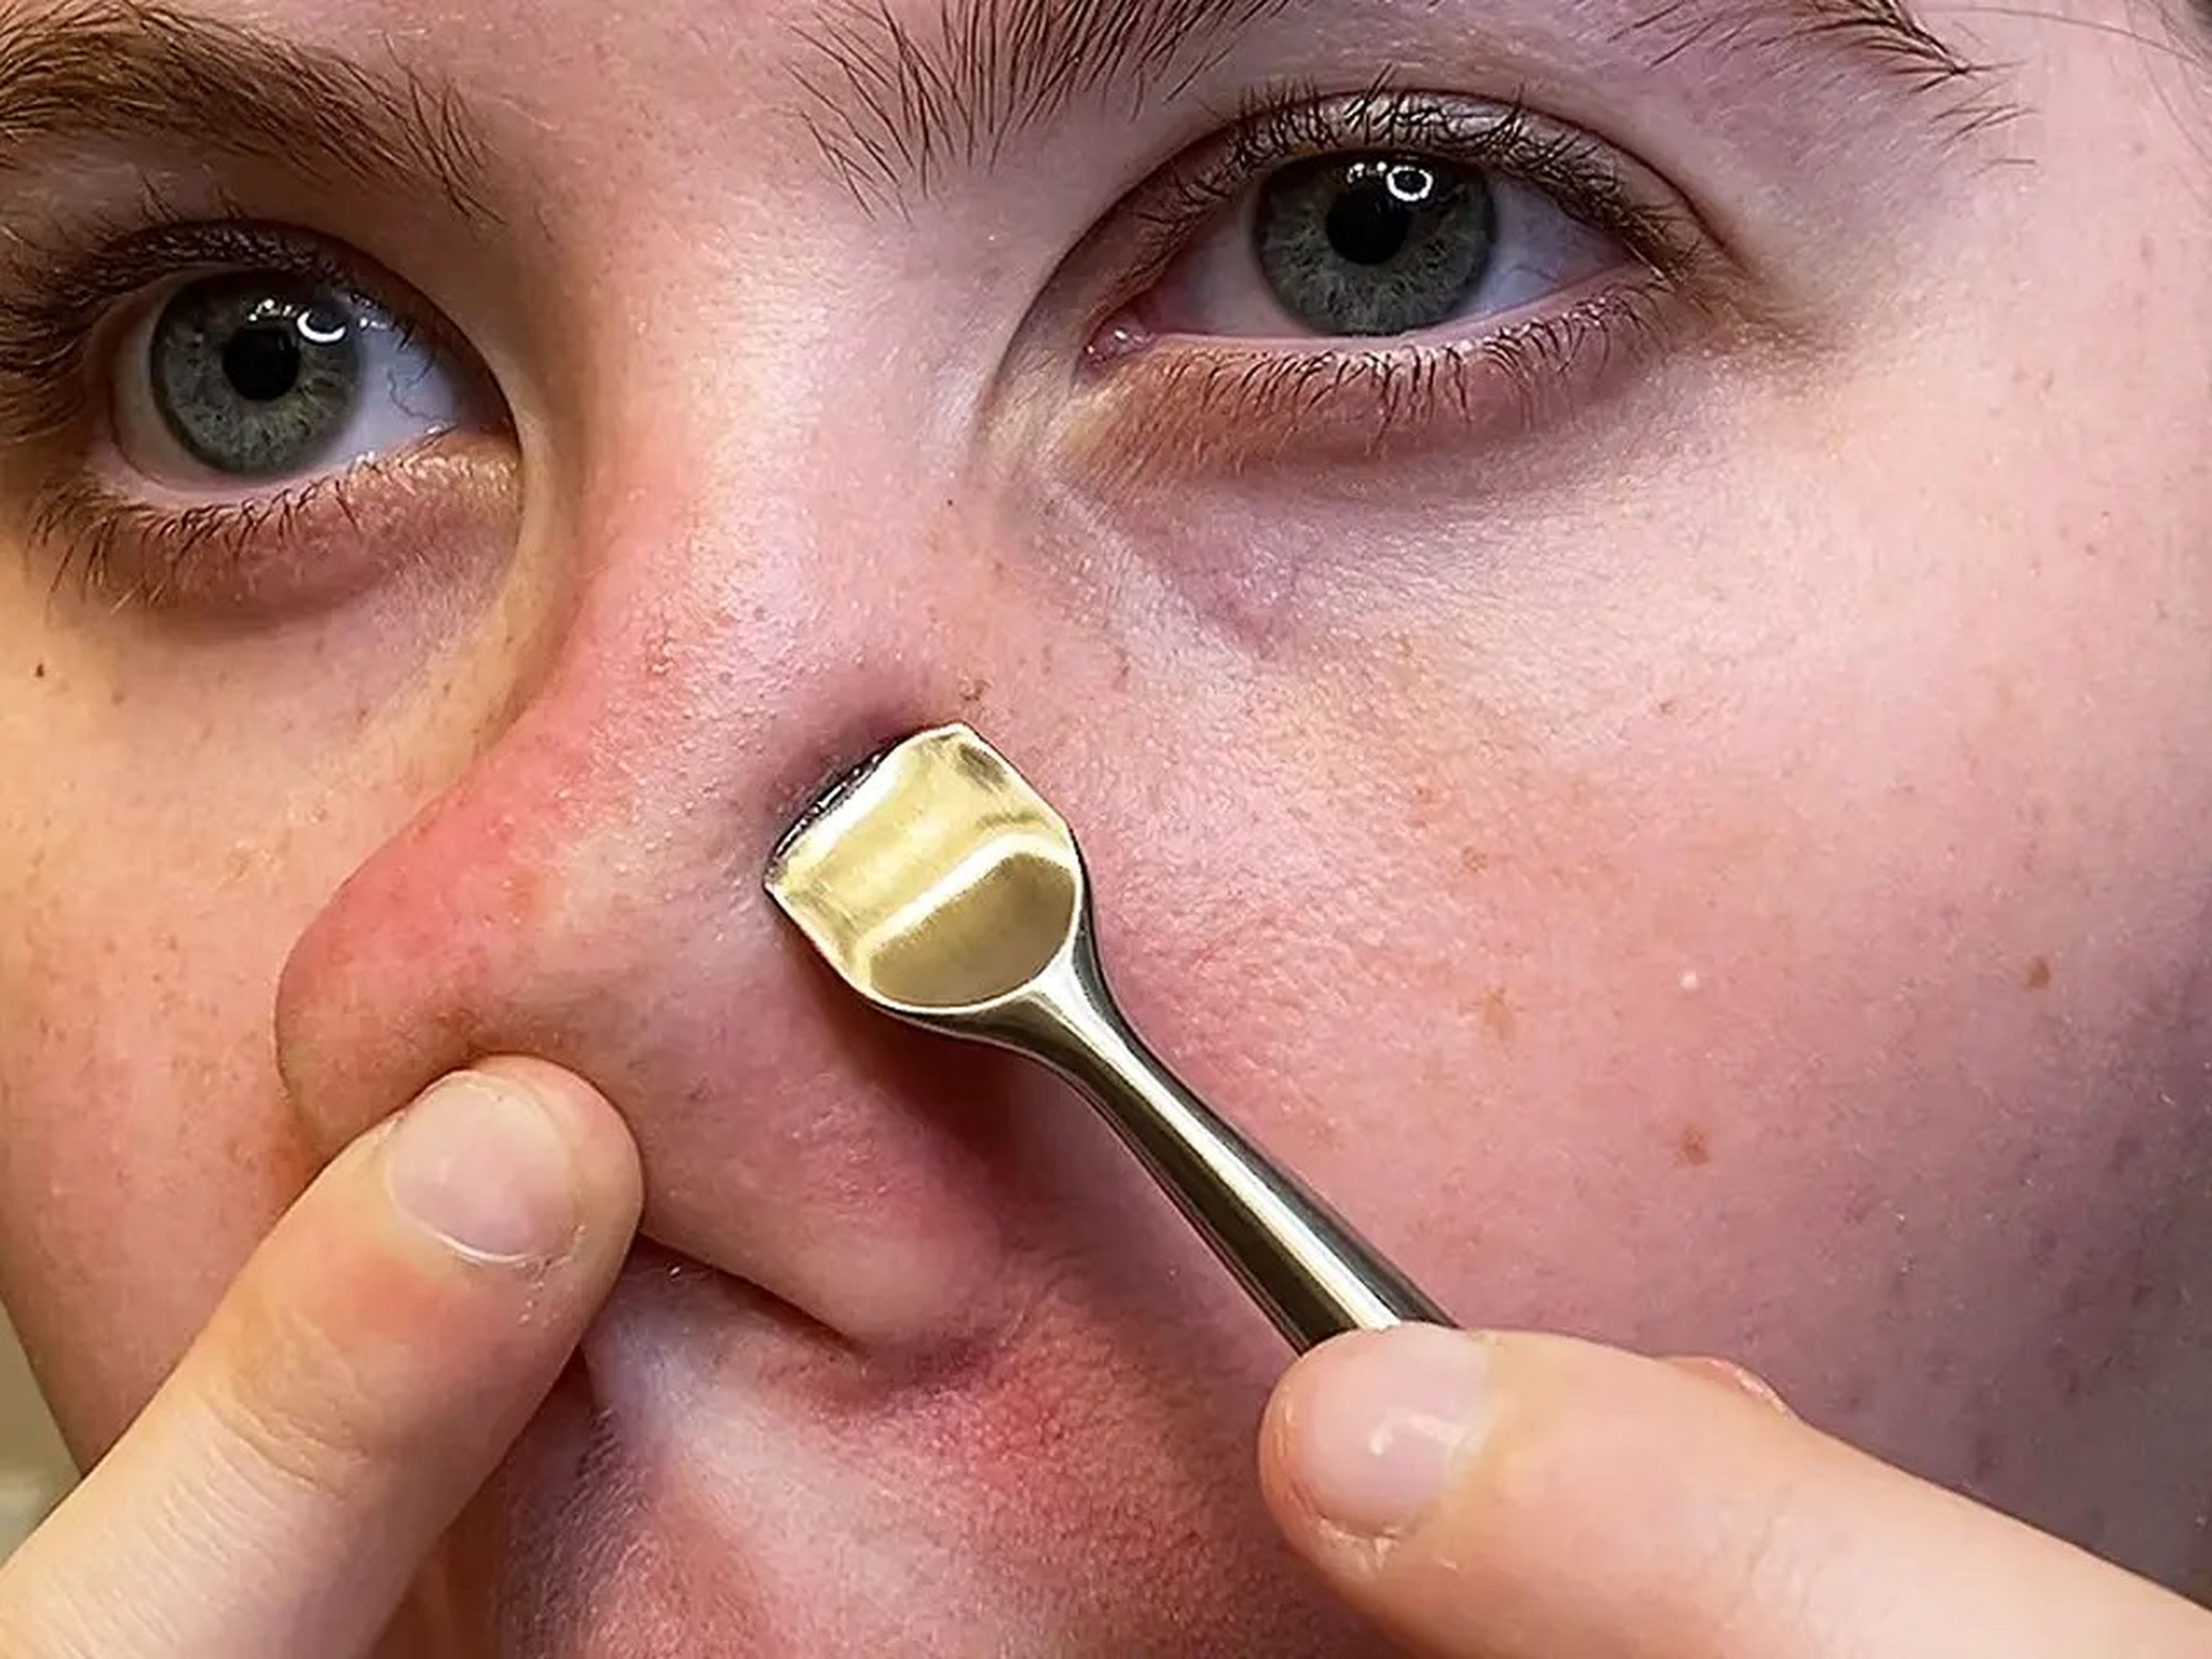 Woman using a pore scraping tool on her nose.